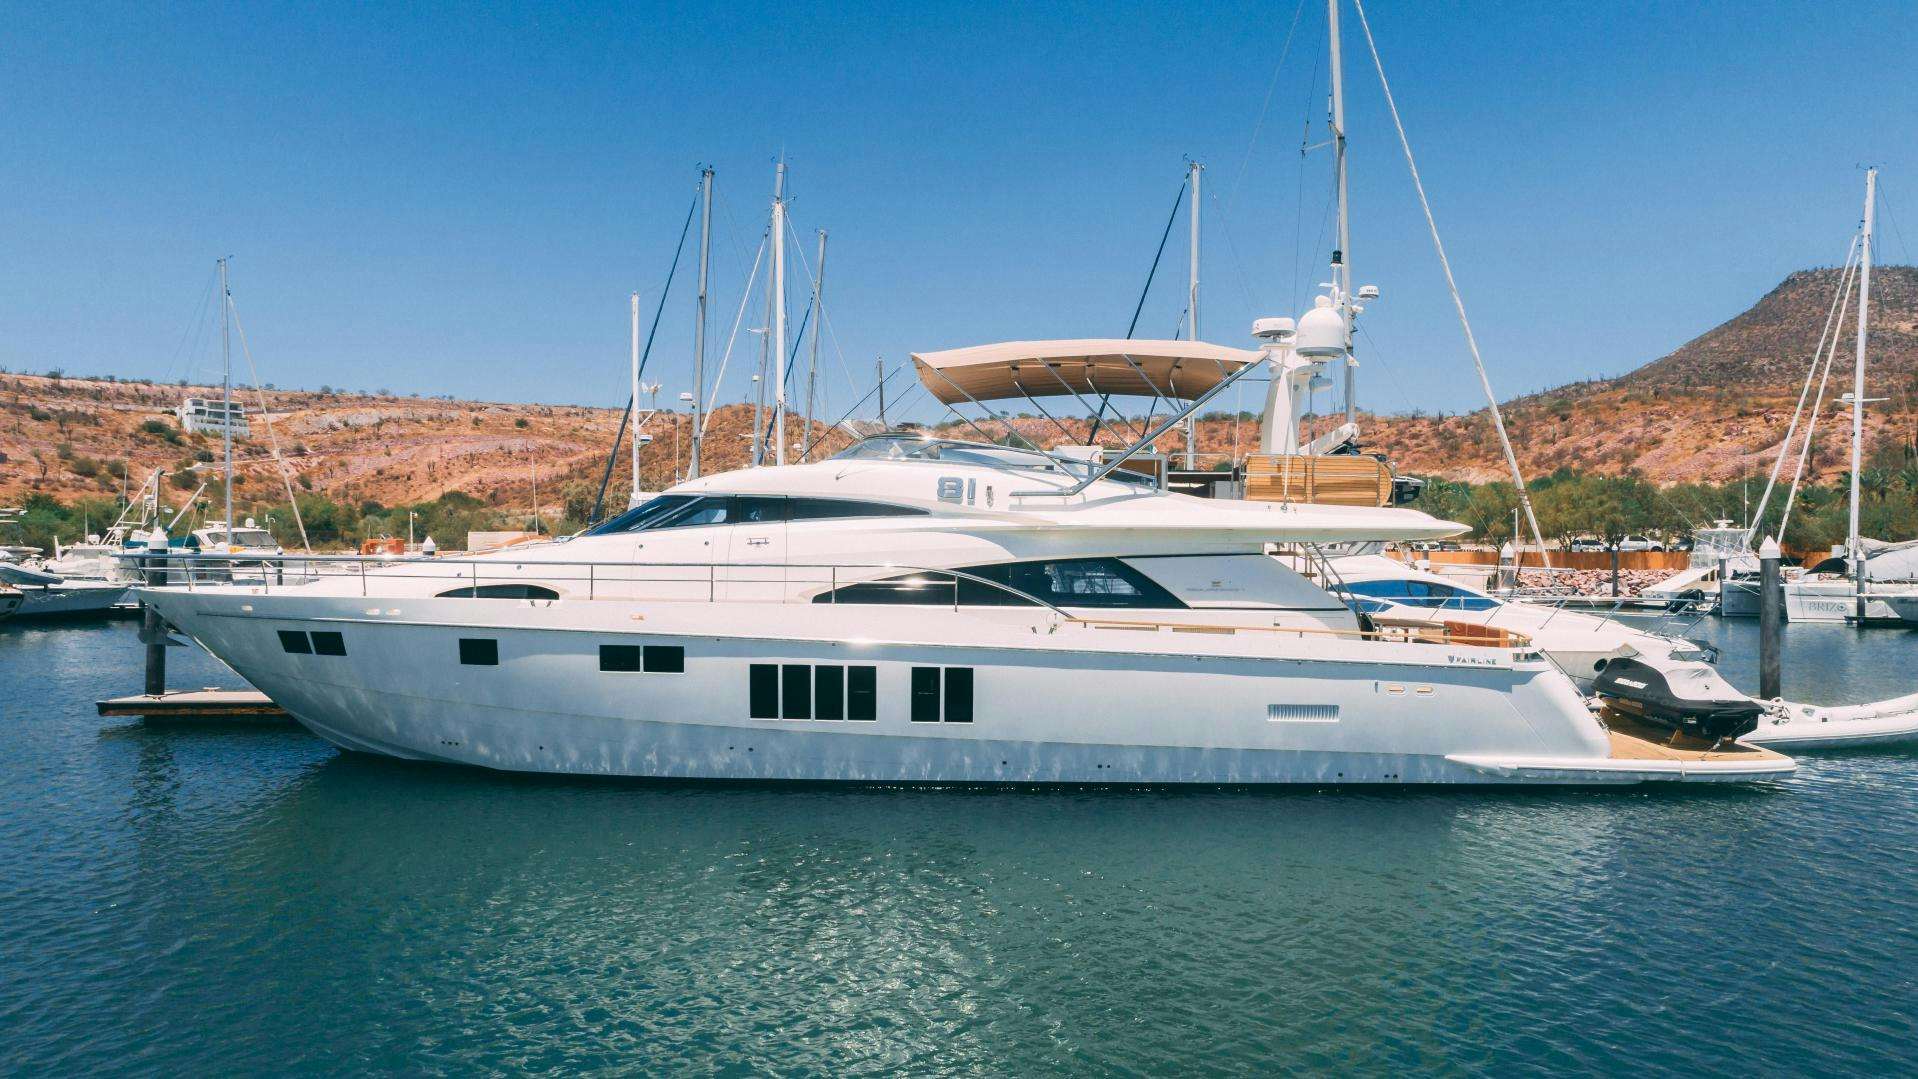 Watch Video for OCHO UNO Yacht for Sale